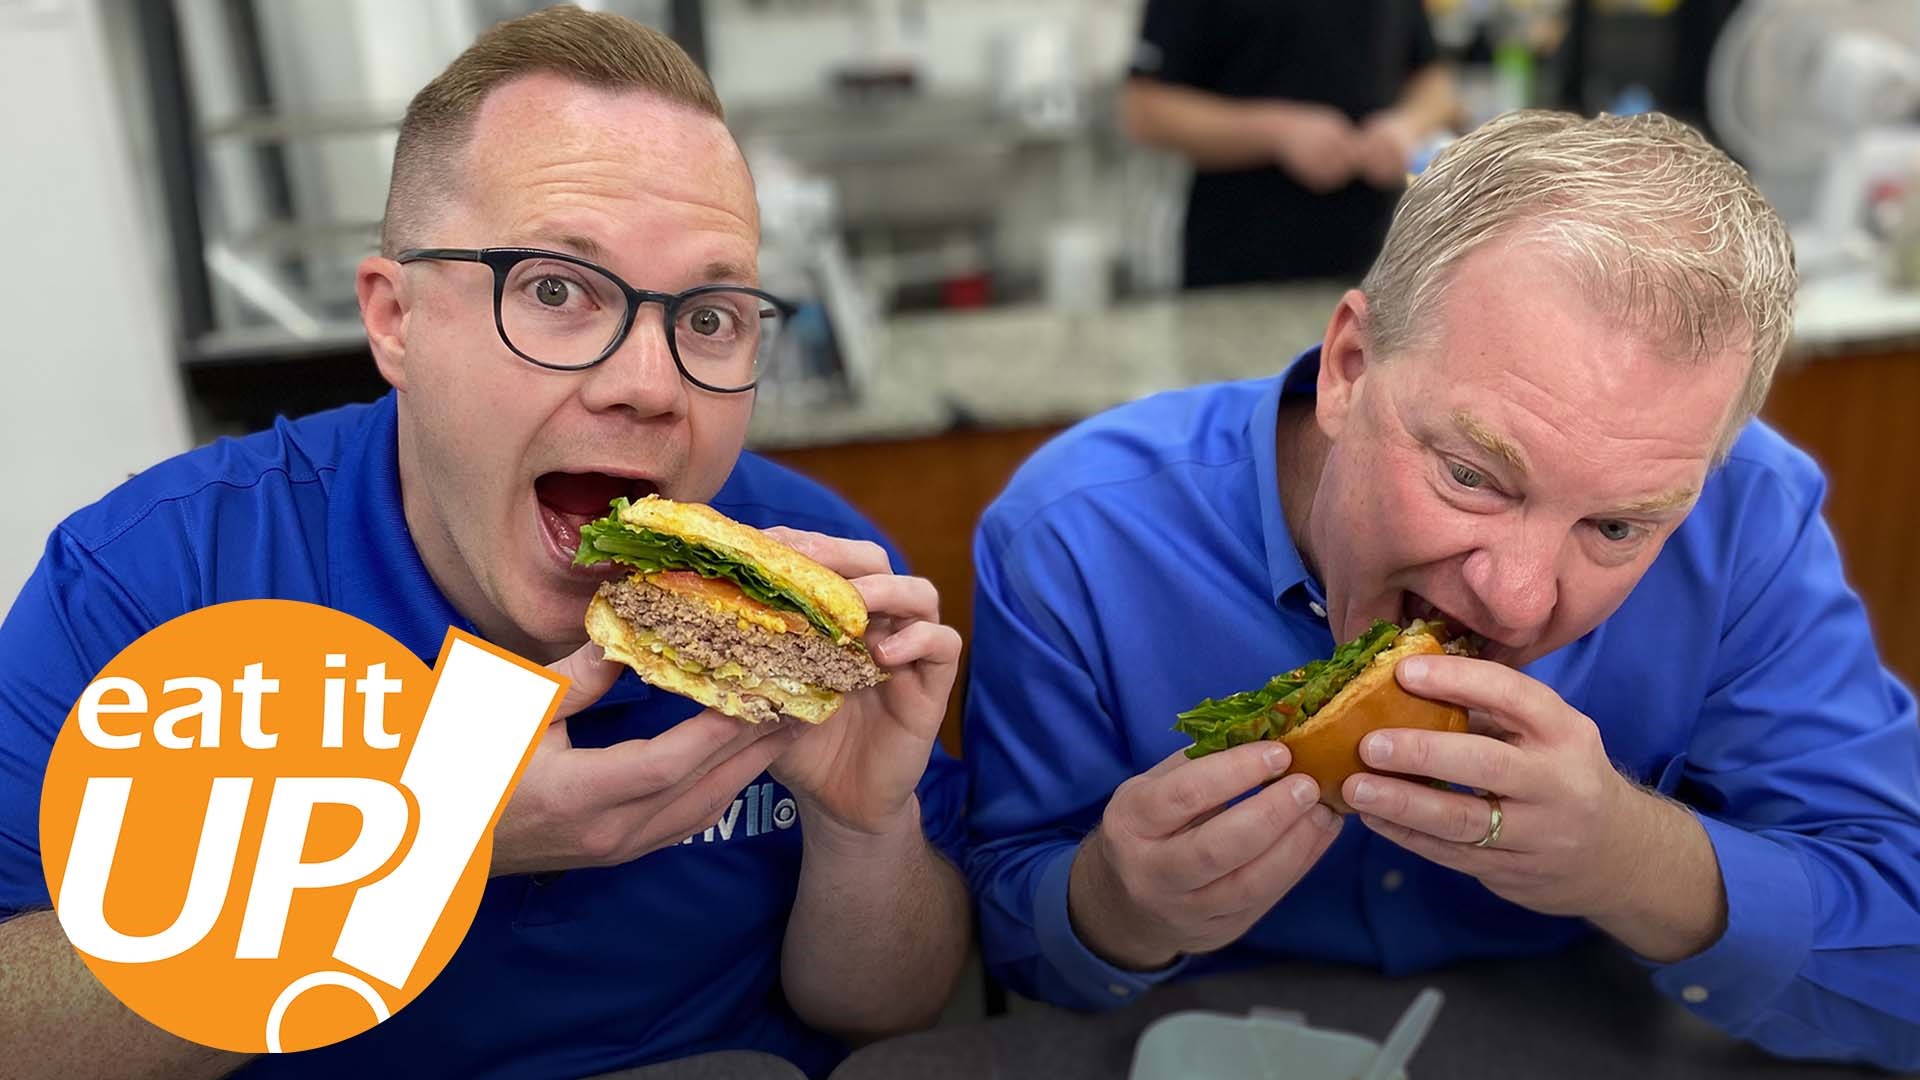 This week, Skot and Tom take us to America's Street Food-- one of central Arkansas' truly hidden gems.